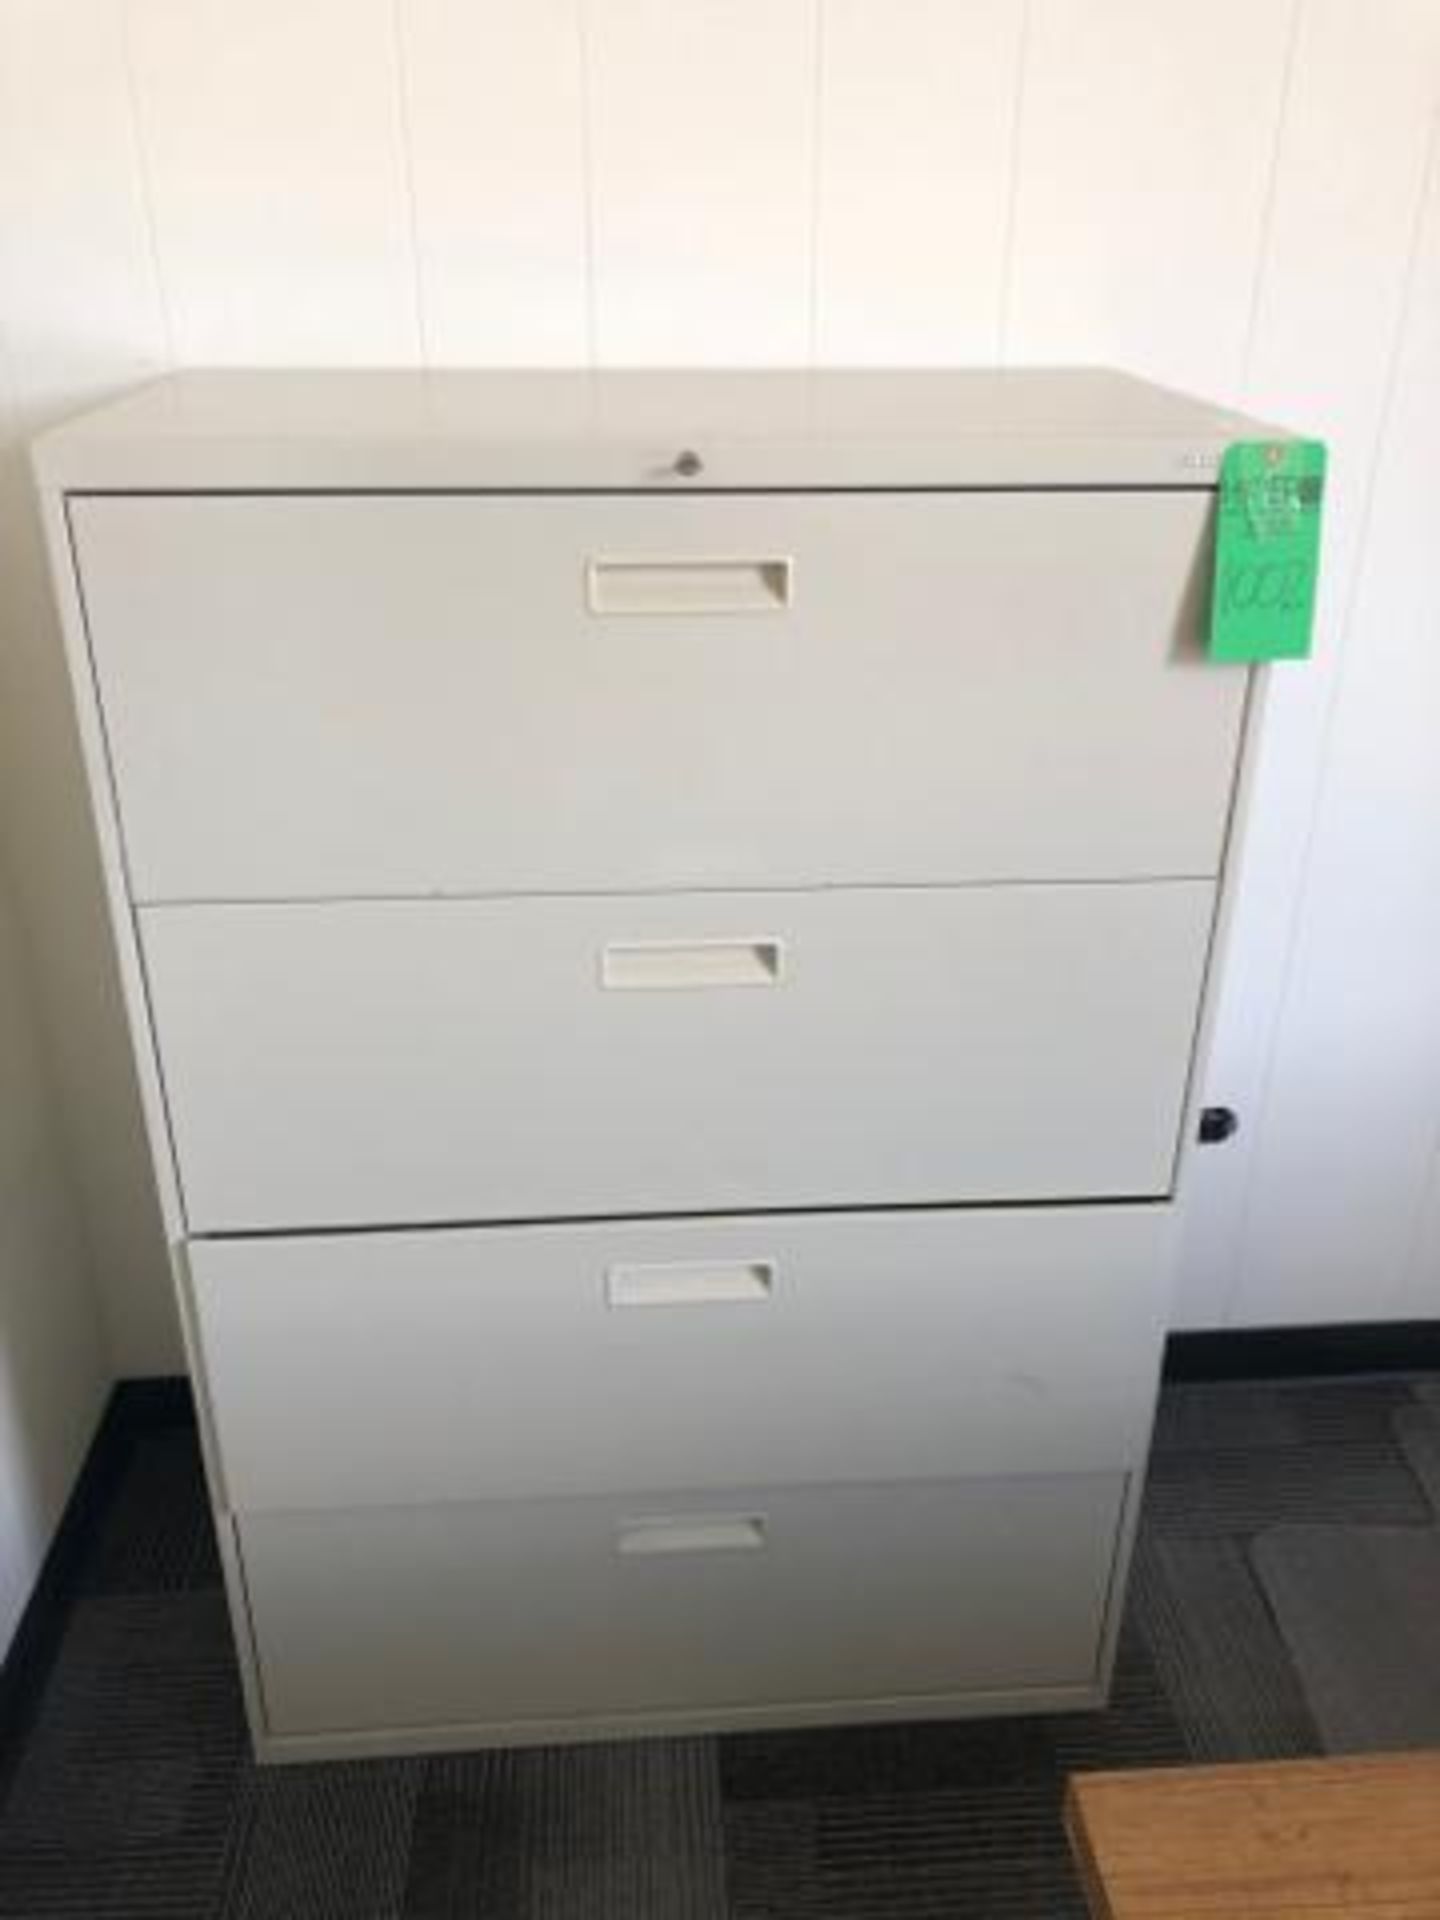 Office Furniture,To include: (1) 2 Drawer Wood Desk with Metal Base 29" x 78"x 29"; (1) 4 Drawer Met - Image 3 of 3